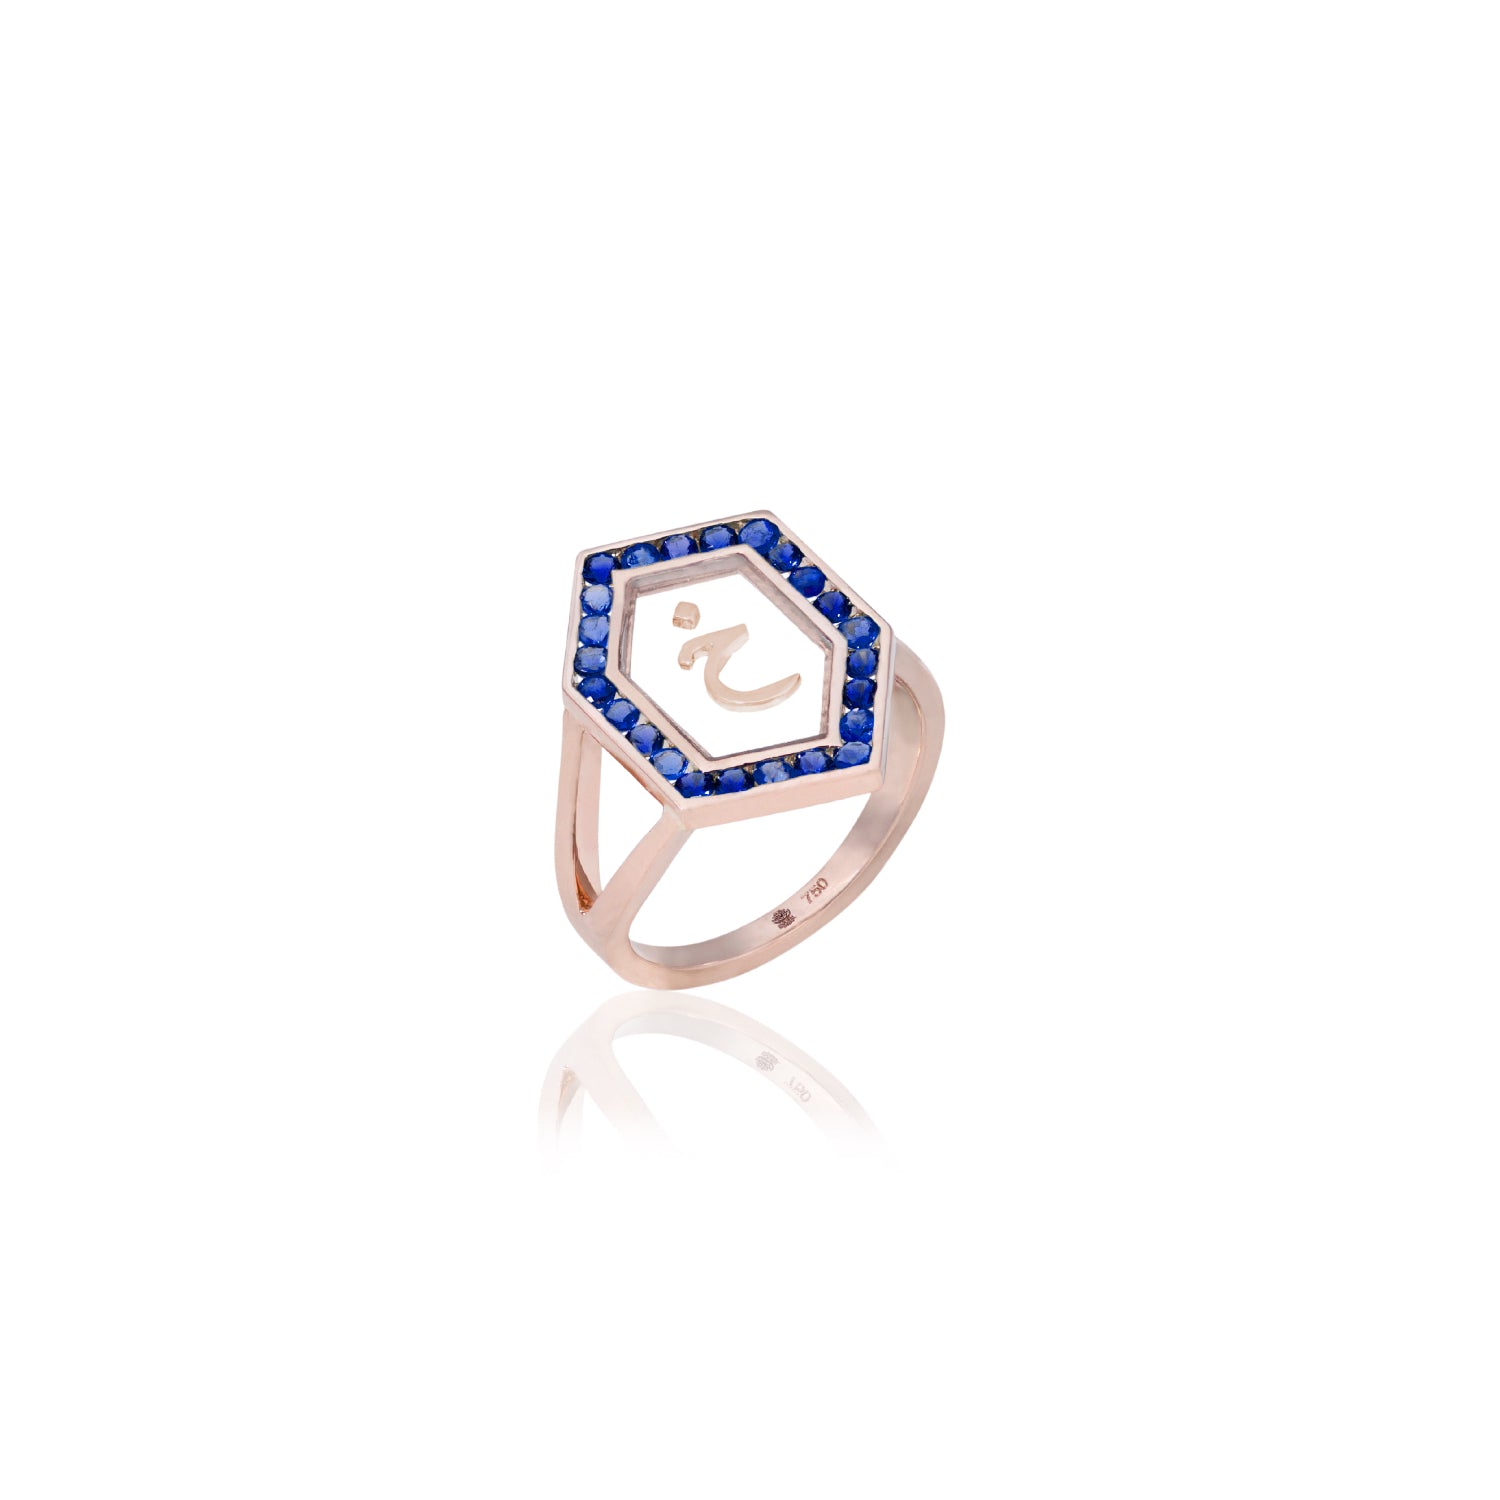 Qamoos 1.0 Letter خ Sapphire Ring in Rose Gold